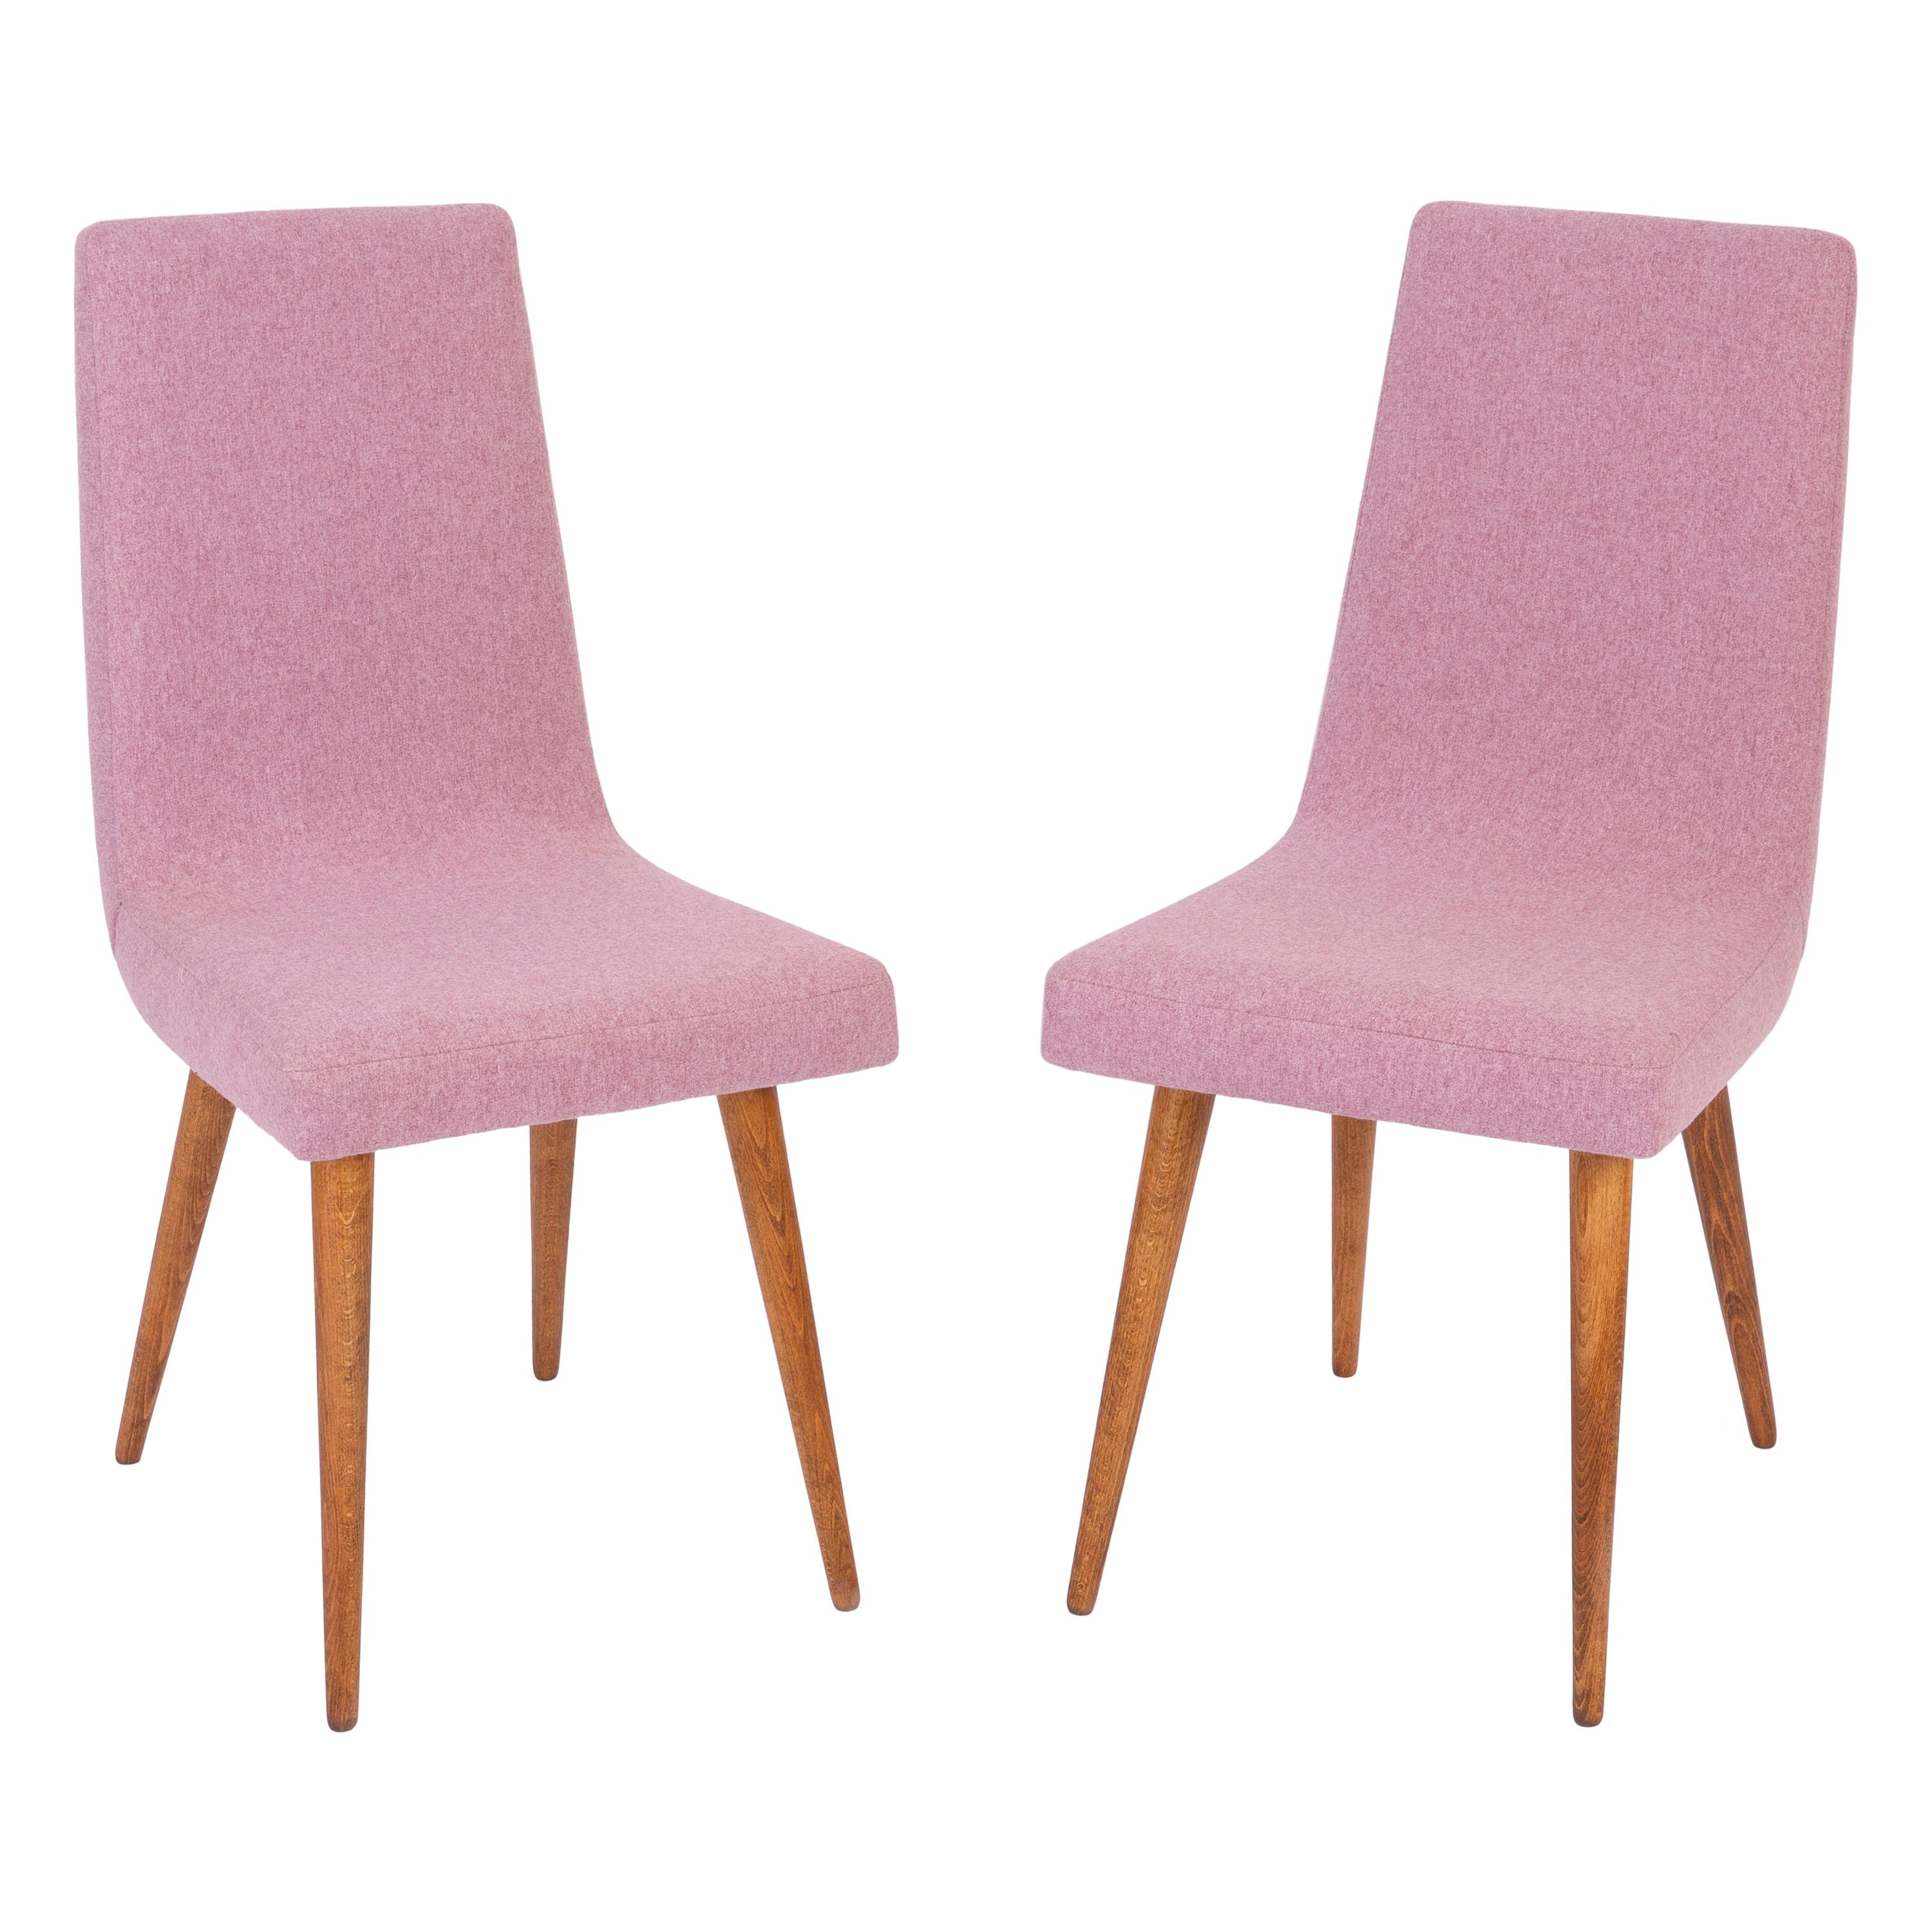 Set of Two 20th Century Pink Mélange Rajmund Halas Chairs, 1960s For Sale